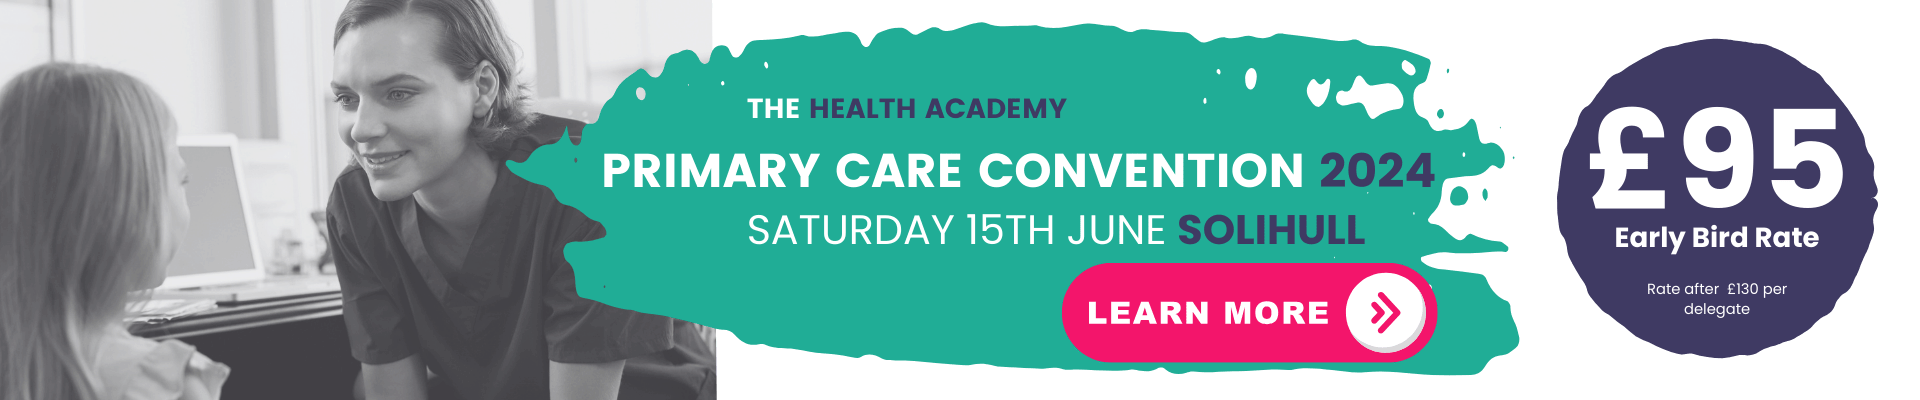 Image showing advert for the Health Academy Primary Care Convention